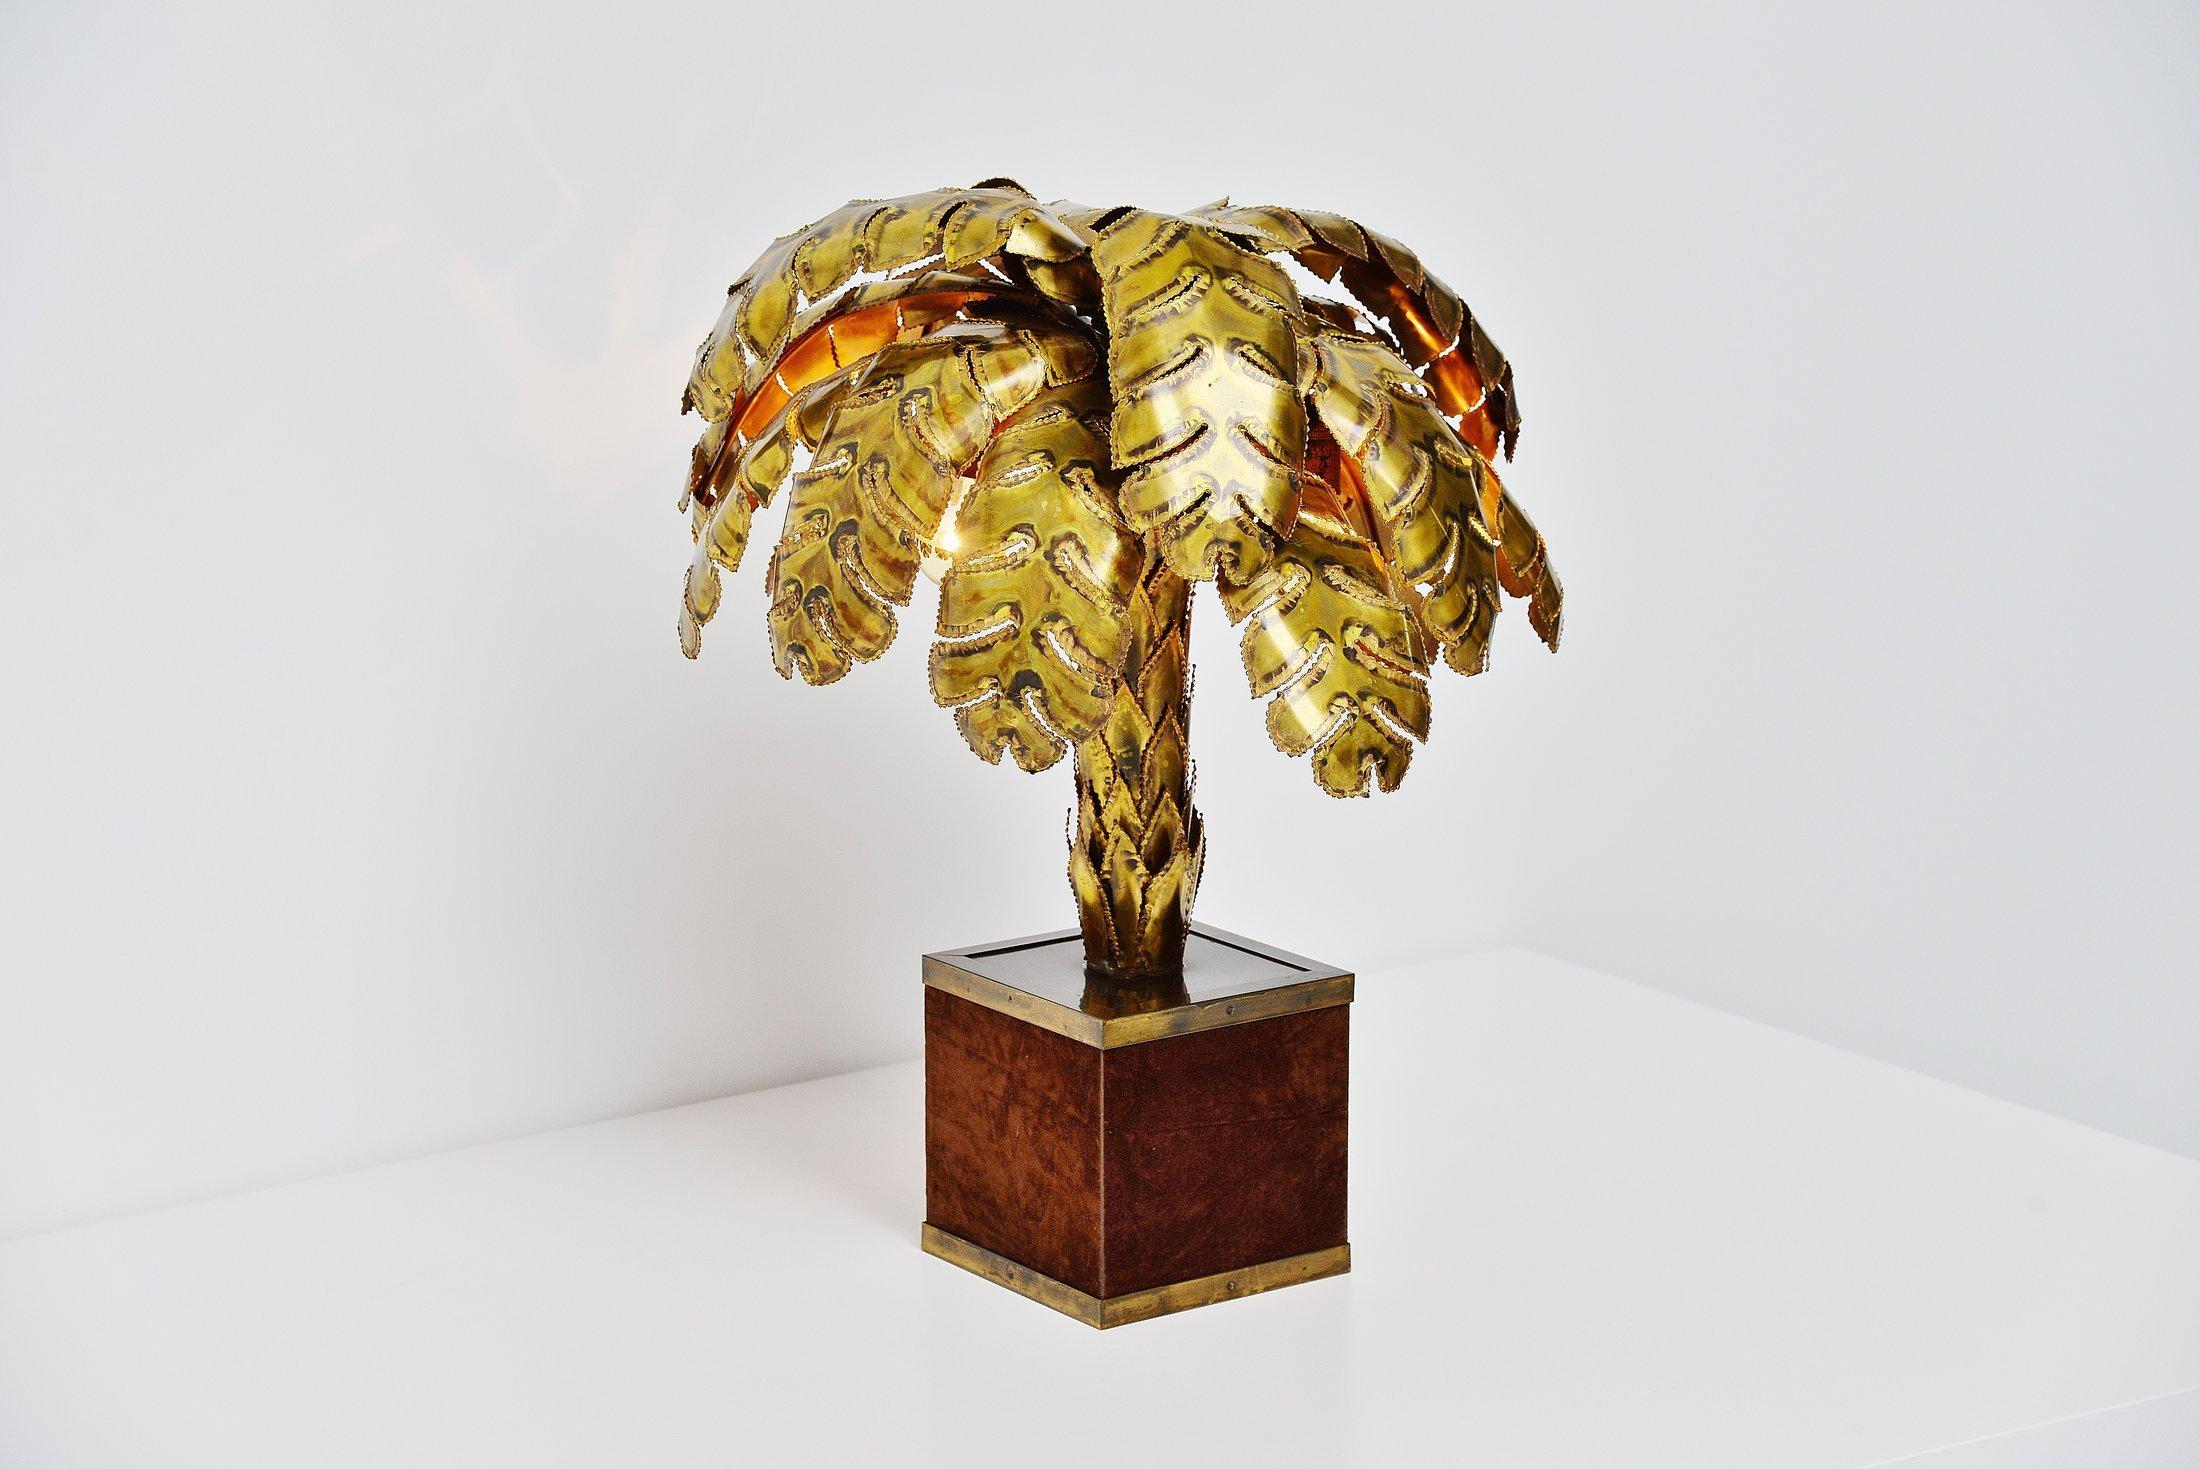 Very nice medium sized palm tree table lamp designed by Christian Techoueyres and manufactured by Maison Jansen, France, 1970. The lamp has a velvet covered brass base and the palm tree is fully made of brass details. Sculpture into a real looking